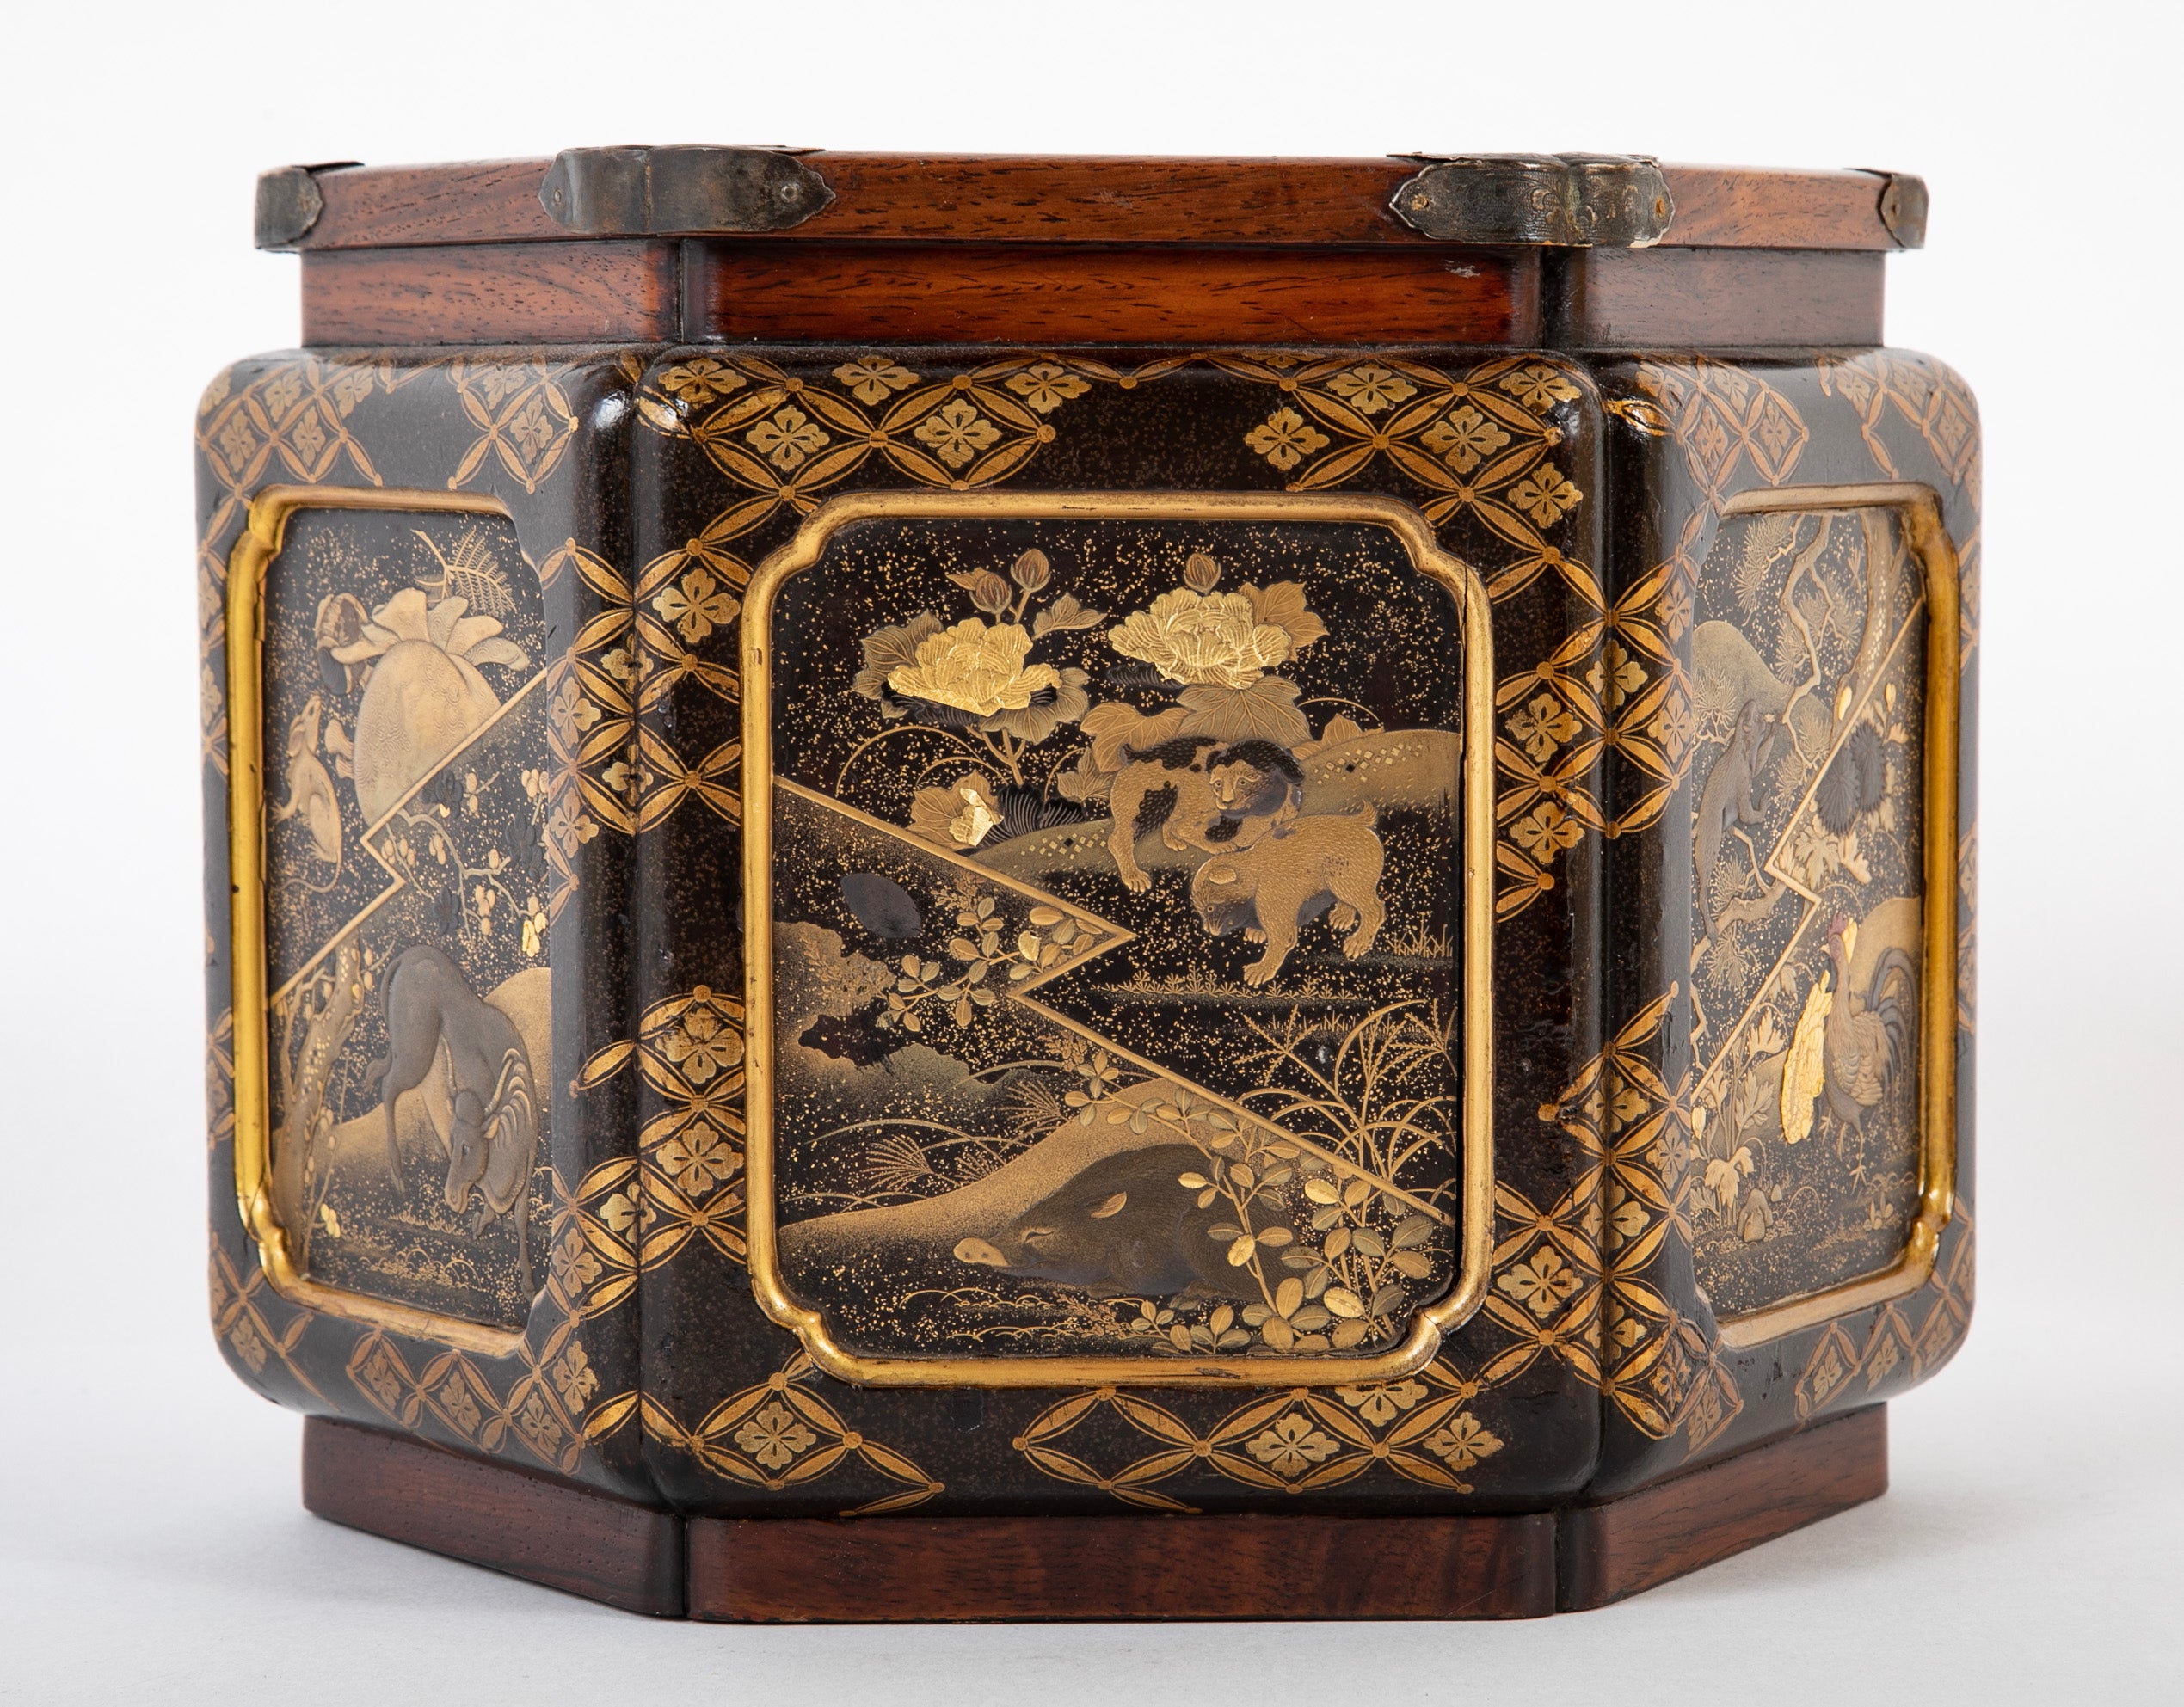 Finely Painted Japanese Cachepot Depicting the 12 Animals of the Zodiac